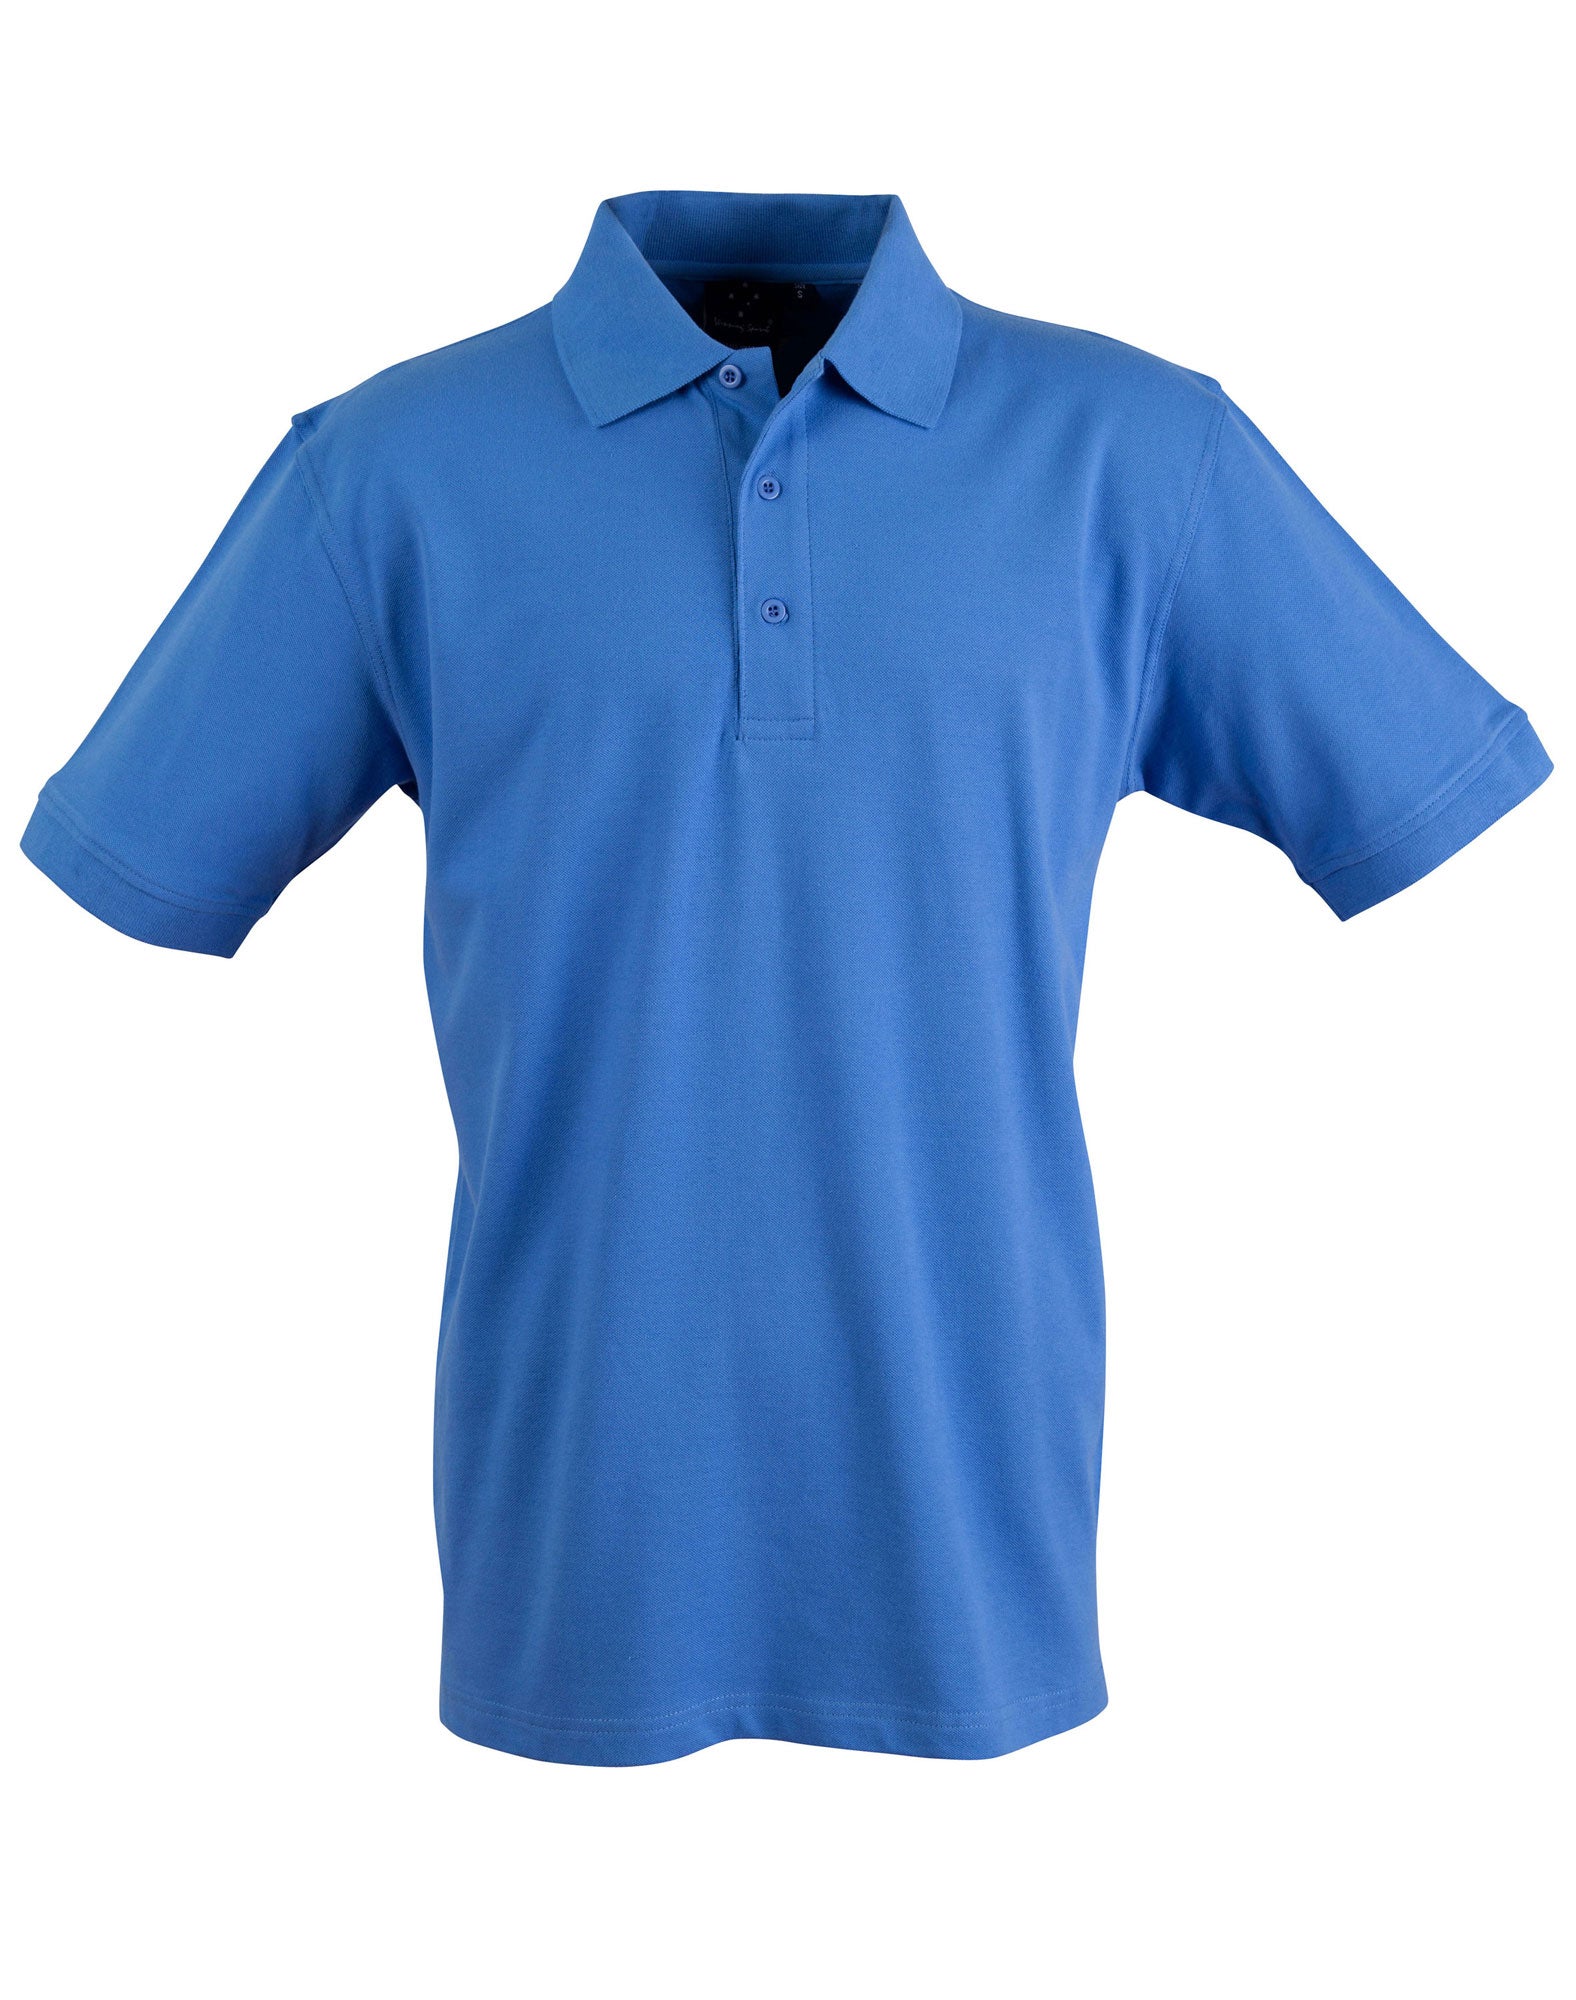 Cotton Stretch Polo Shirt - made by AIW